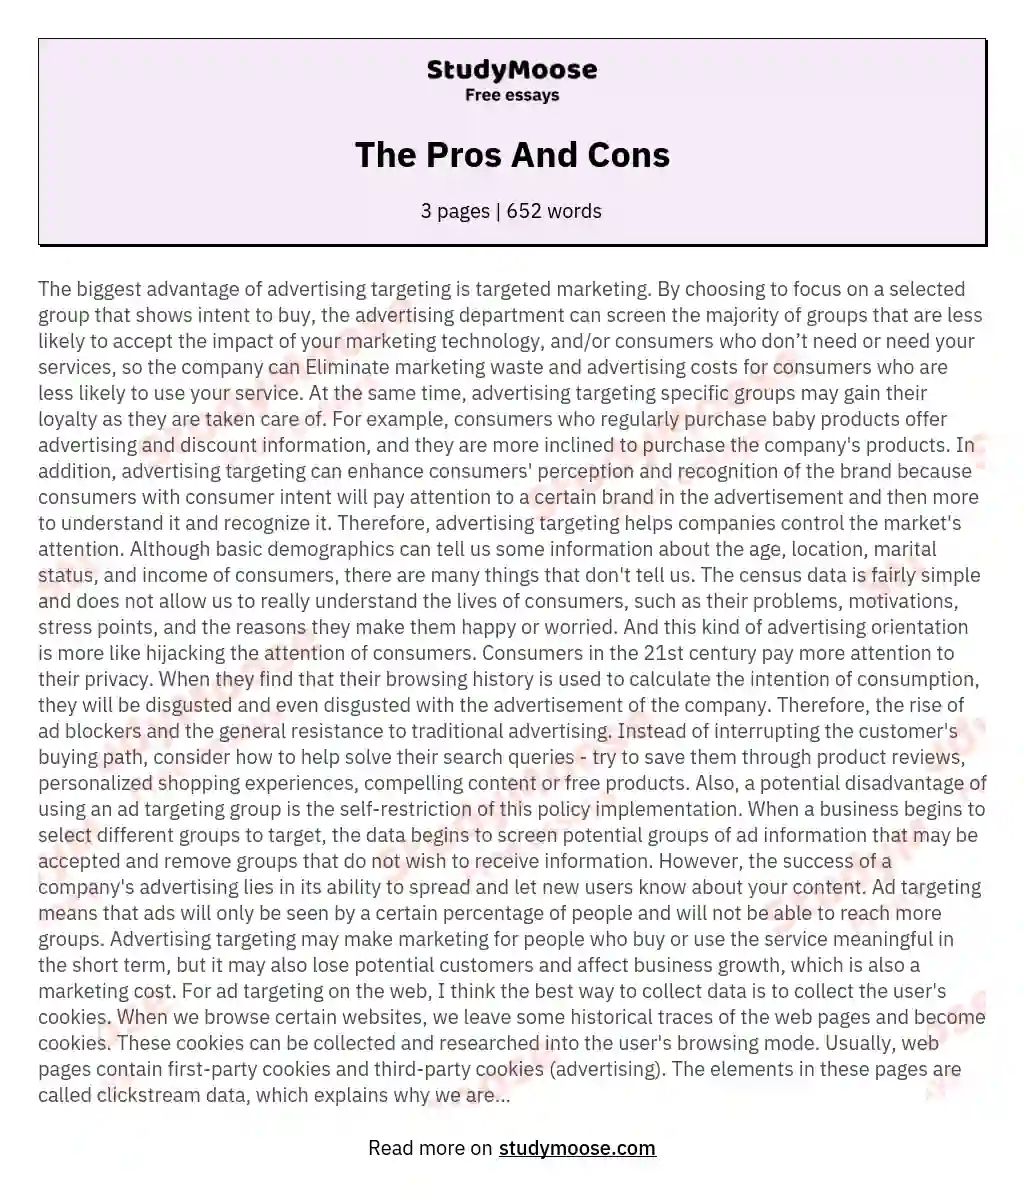 The Pros And Cons essay